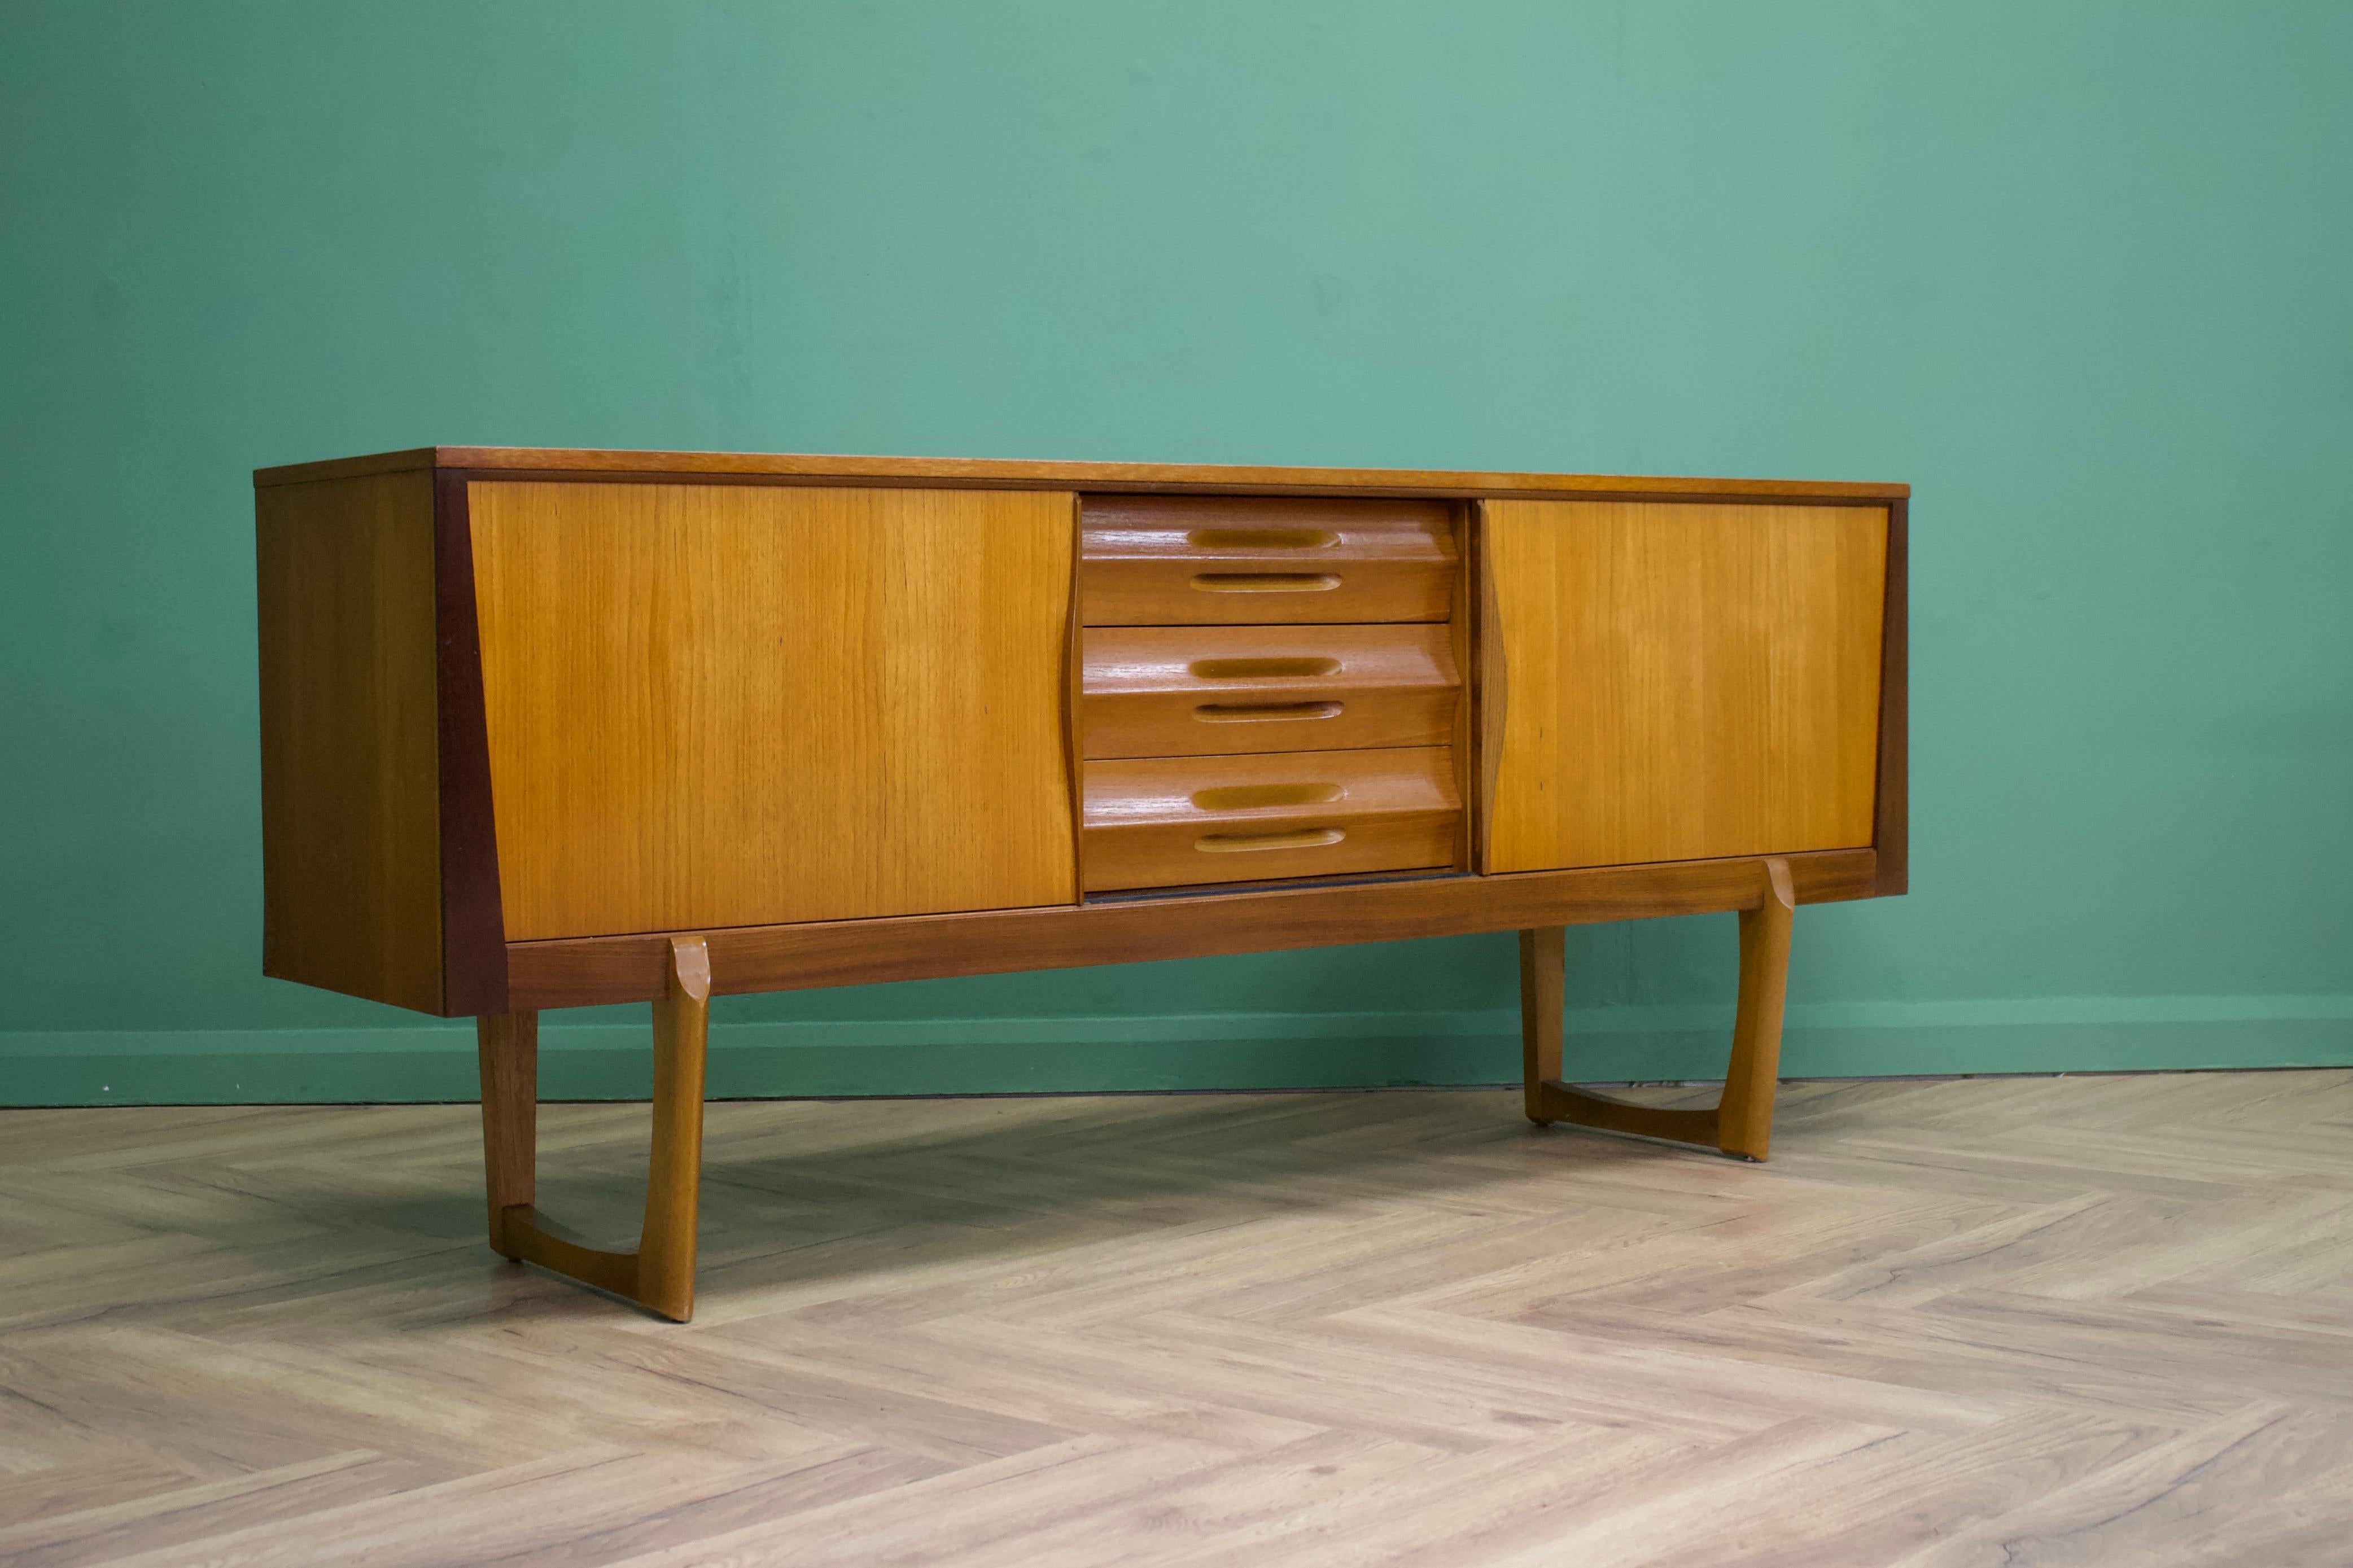 - Mid-Century Modern sideboard.
- Featuring three drawers and two sliding door cupboards
- Manufactured in the UK by Elliots of Newbury
- Made from teak and teak veneer.